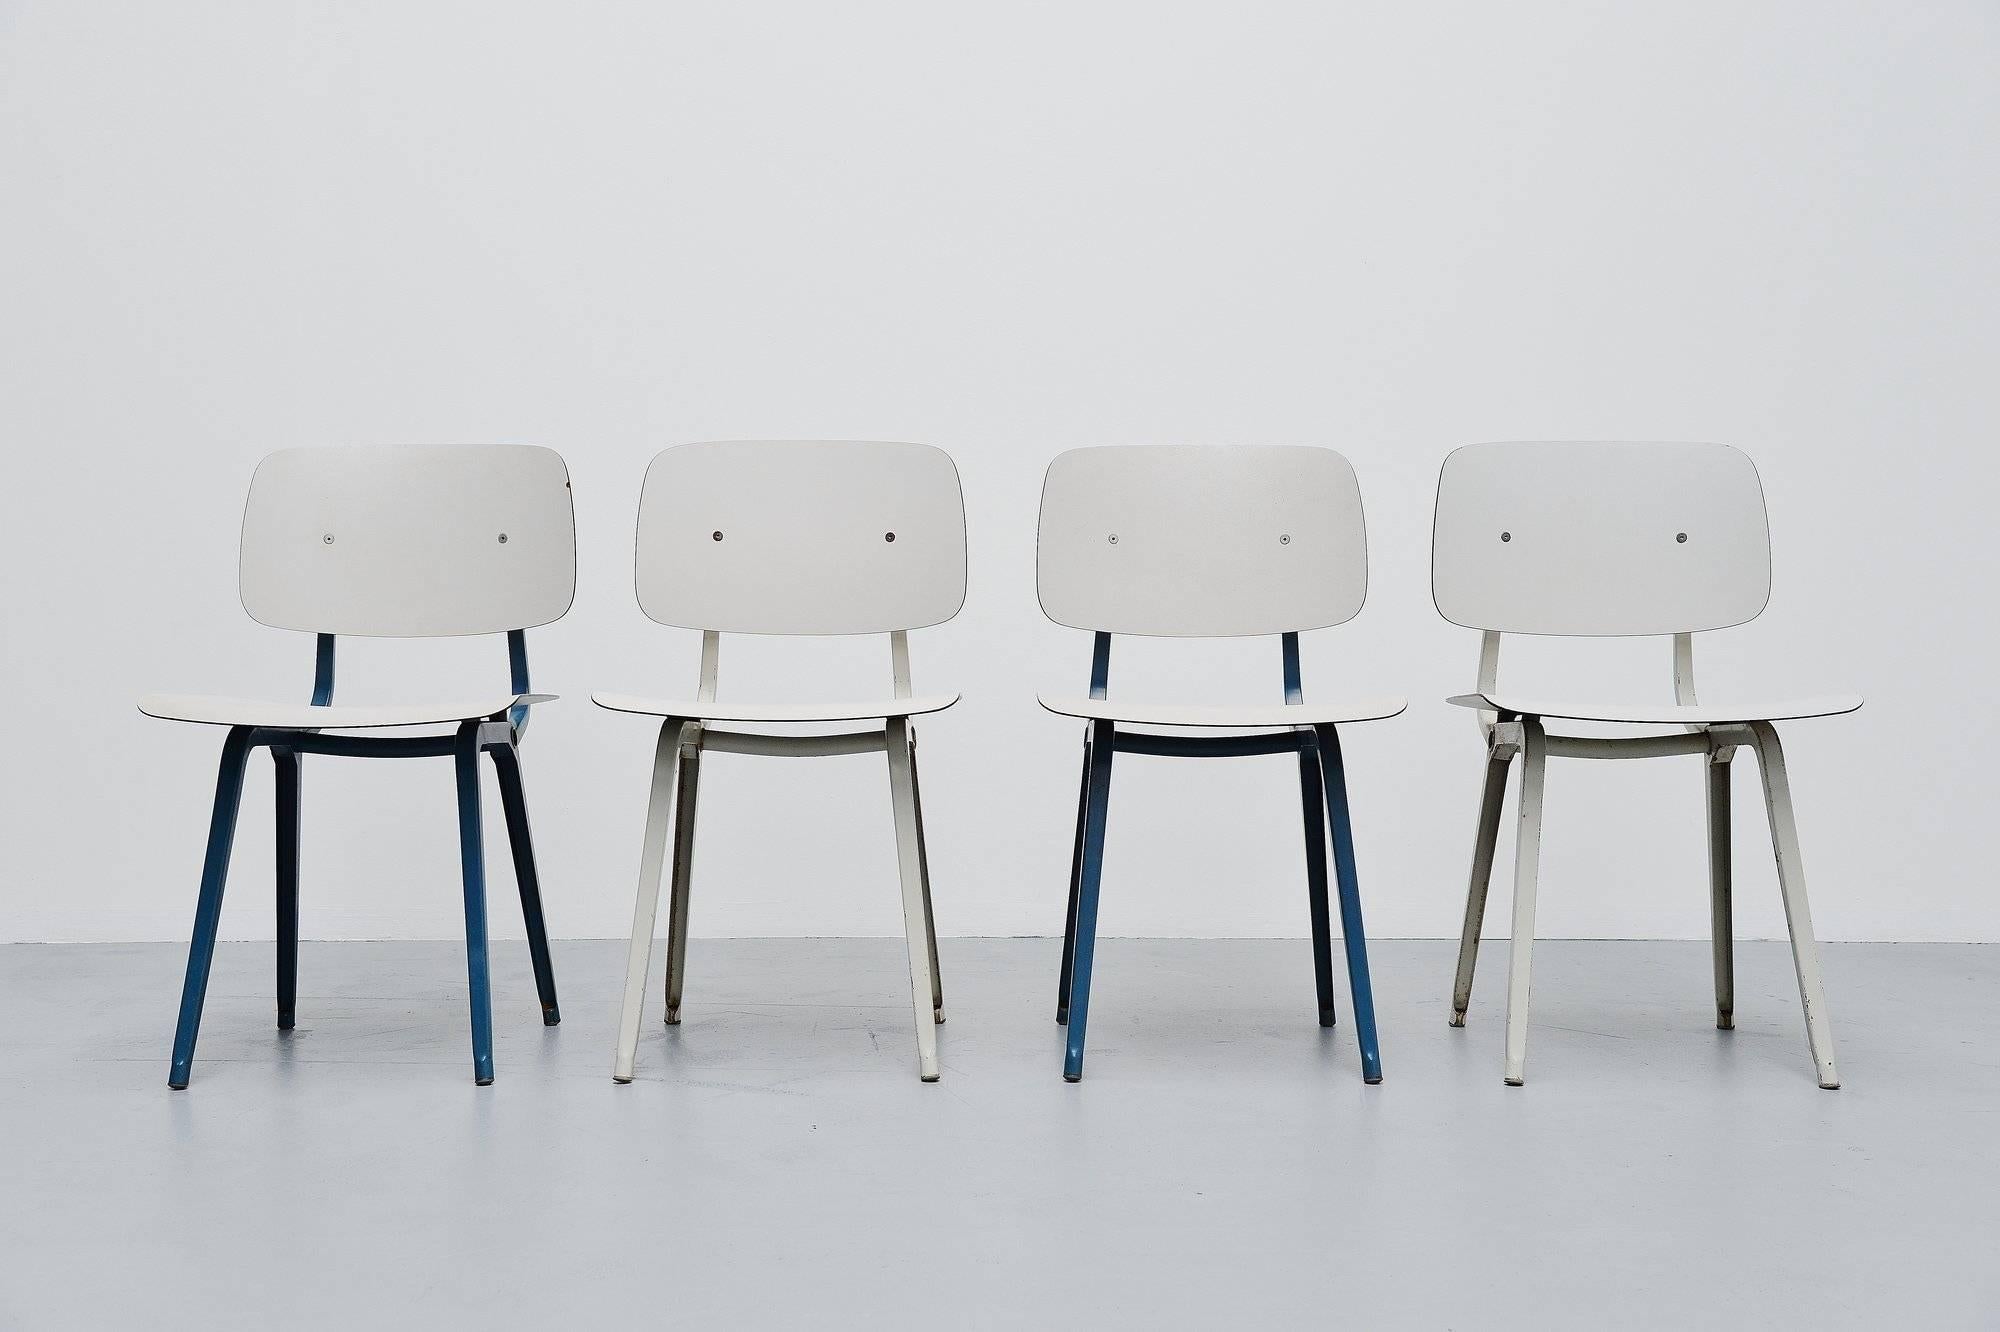 Nice set of four Revolt chairs designed by Friso Kramer for Ahrend de Cirkel, Holland, 1953. Though the Revolt chair was already designed in 1953, the production started in 1958. The chairs have a folded metal base which is very strong and a ciranol